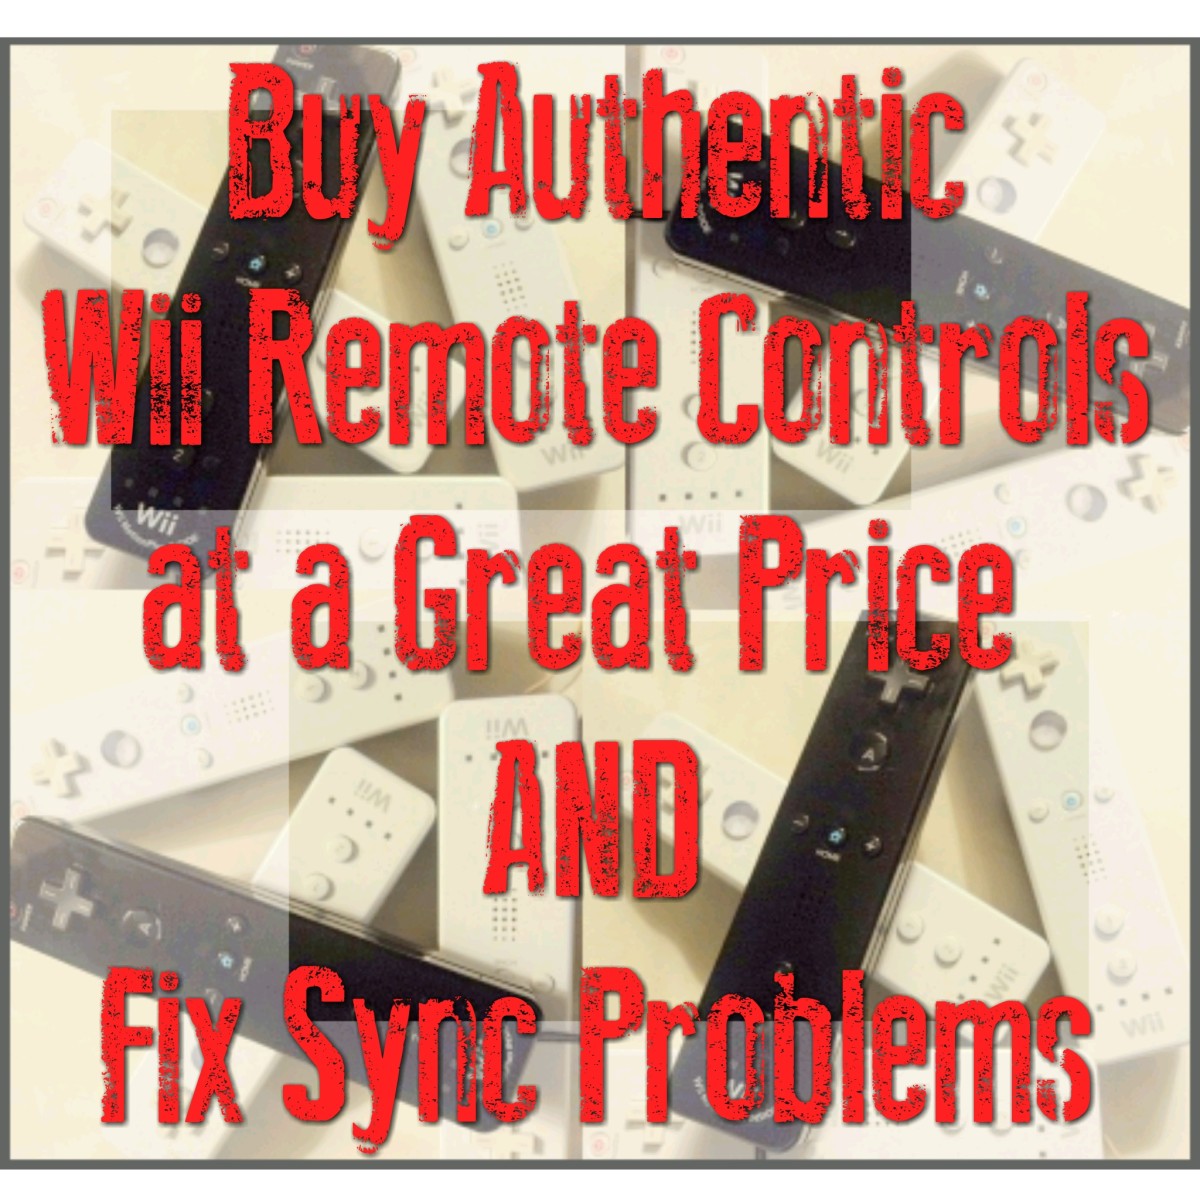 How to Buy Wii Remote Controls at a Great Price and Fix Sync Problems